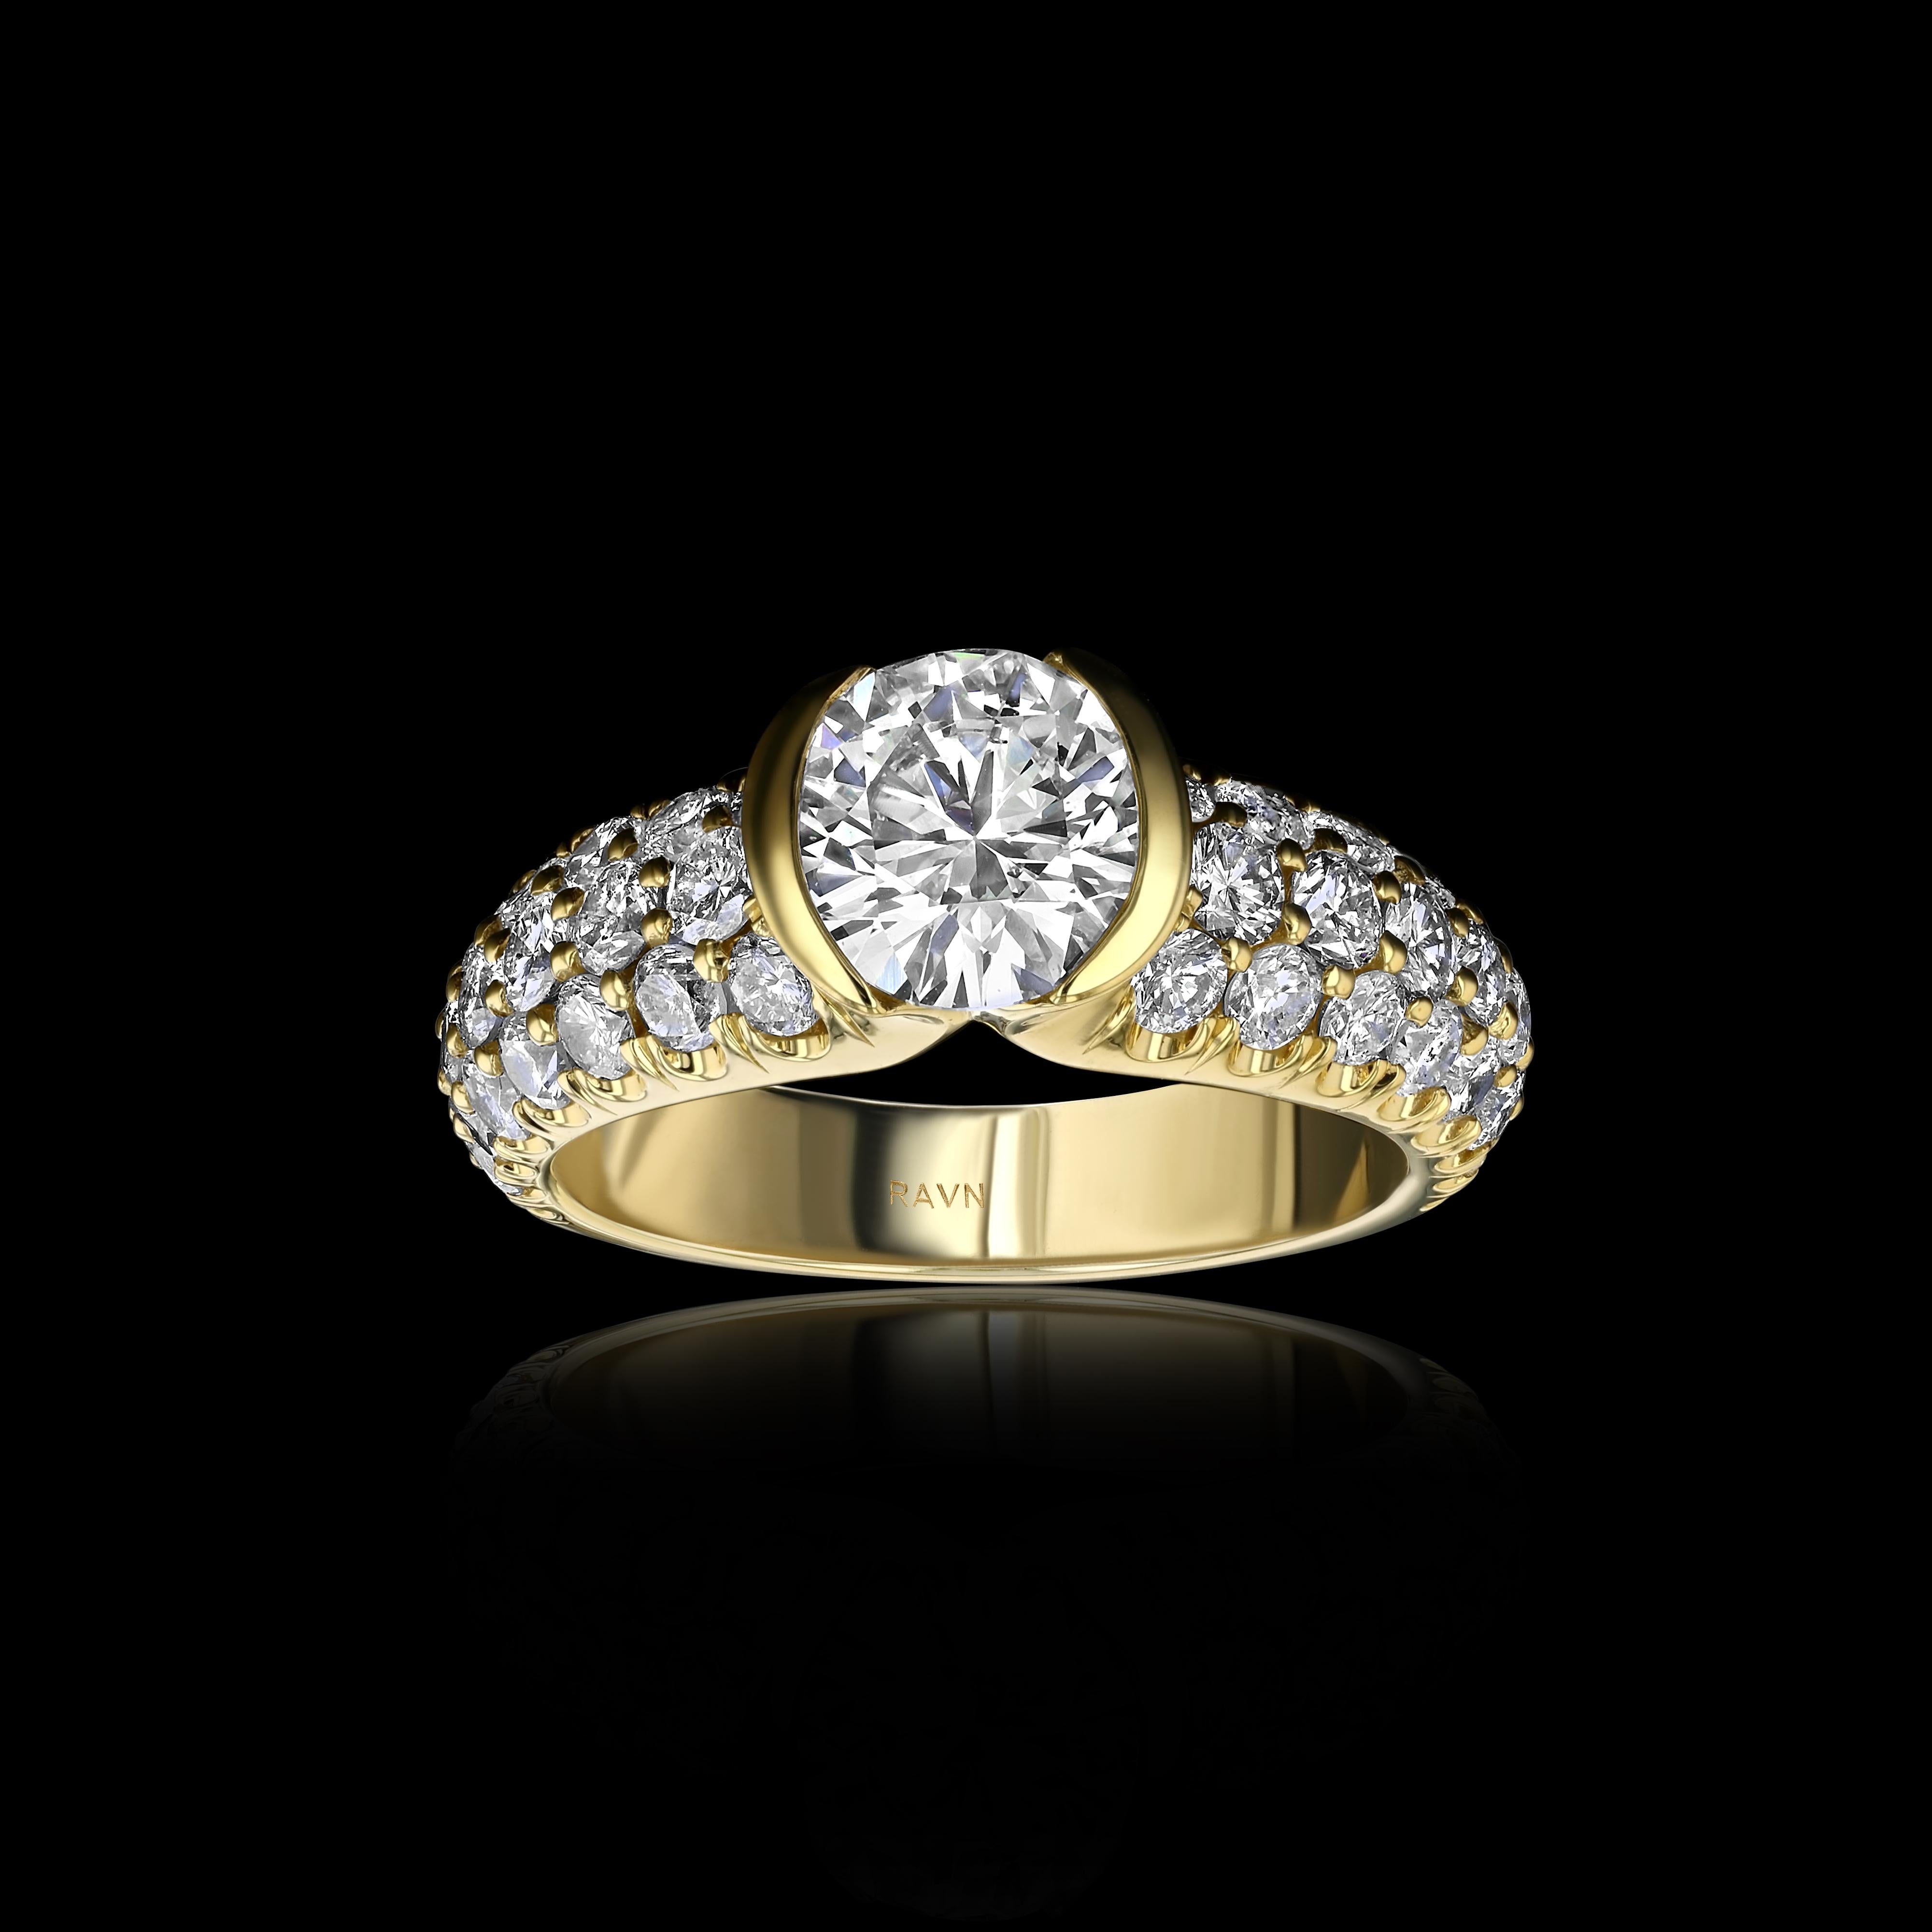 For Sale:  House of RAVN, Signature Old World Inspired Engagement Ring, 1.69ct GIA Diamond 4